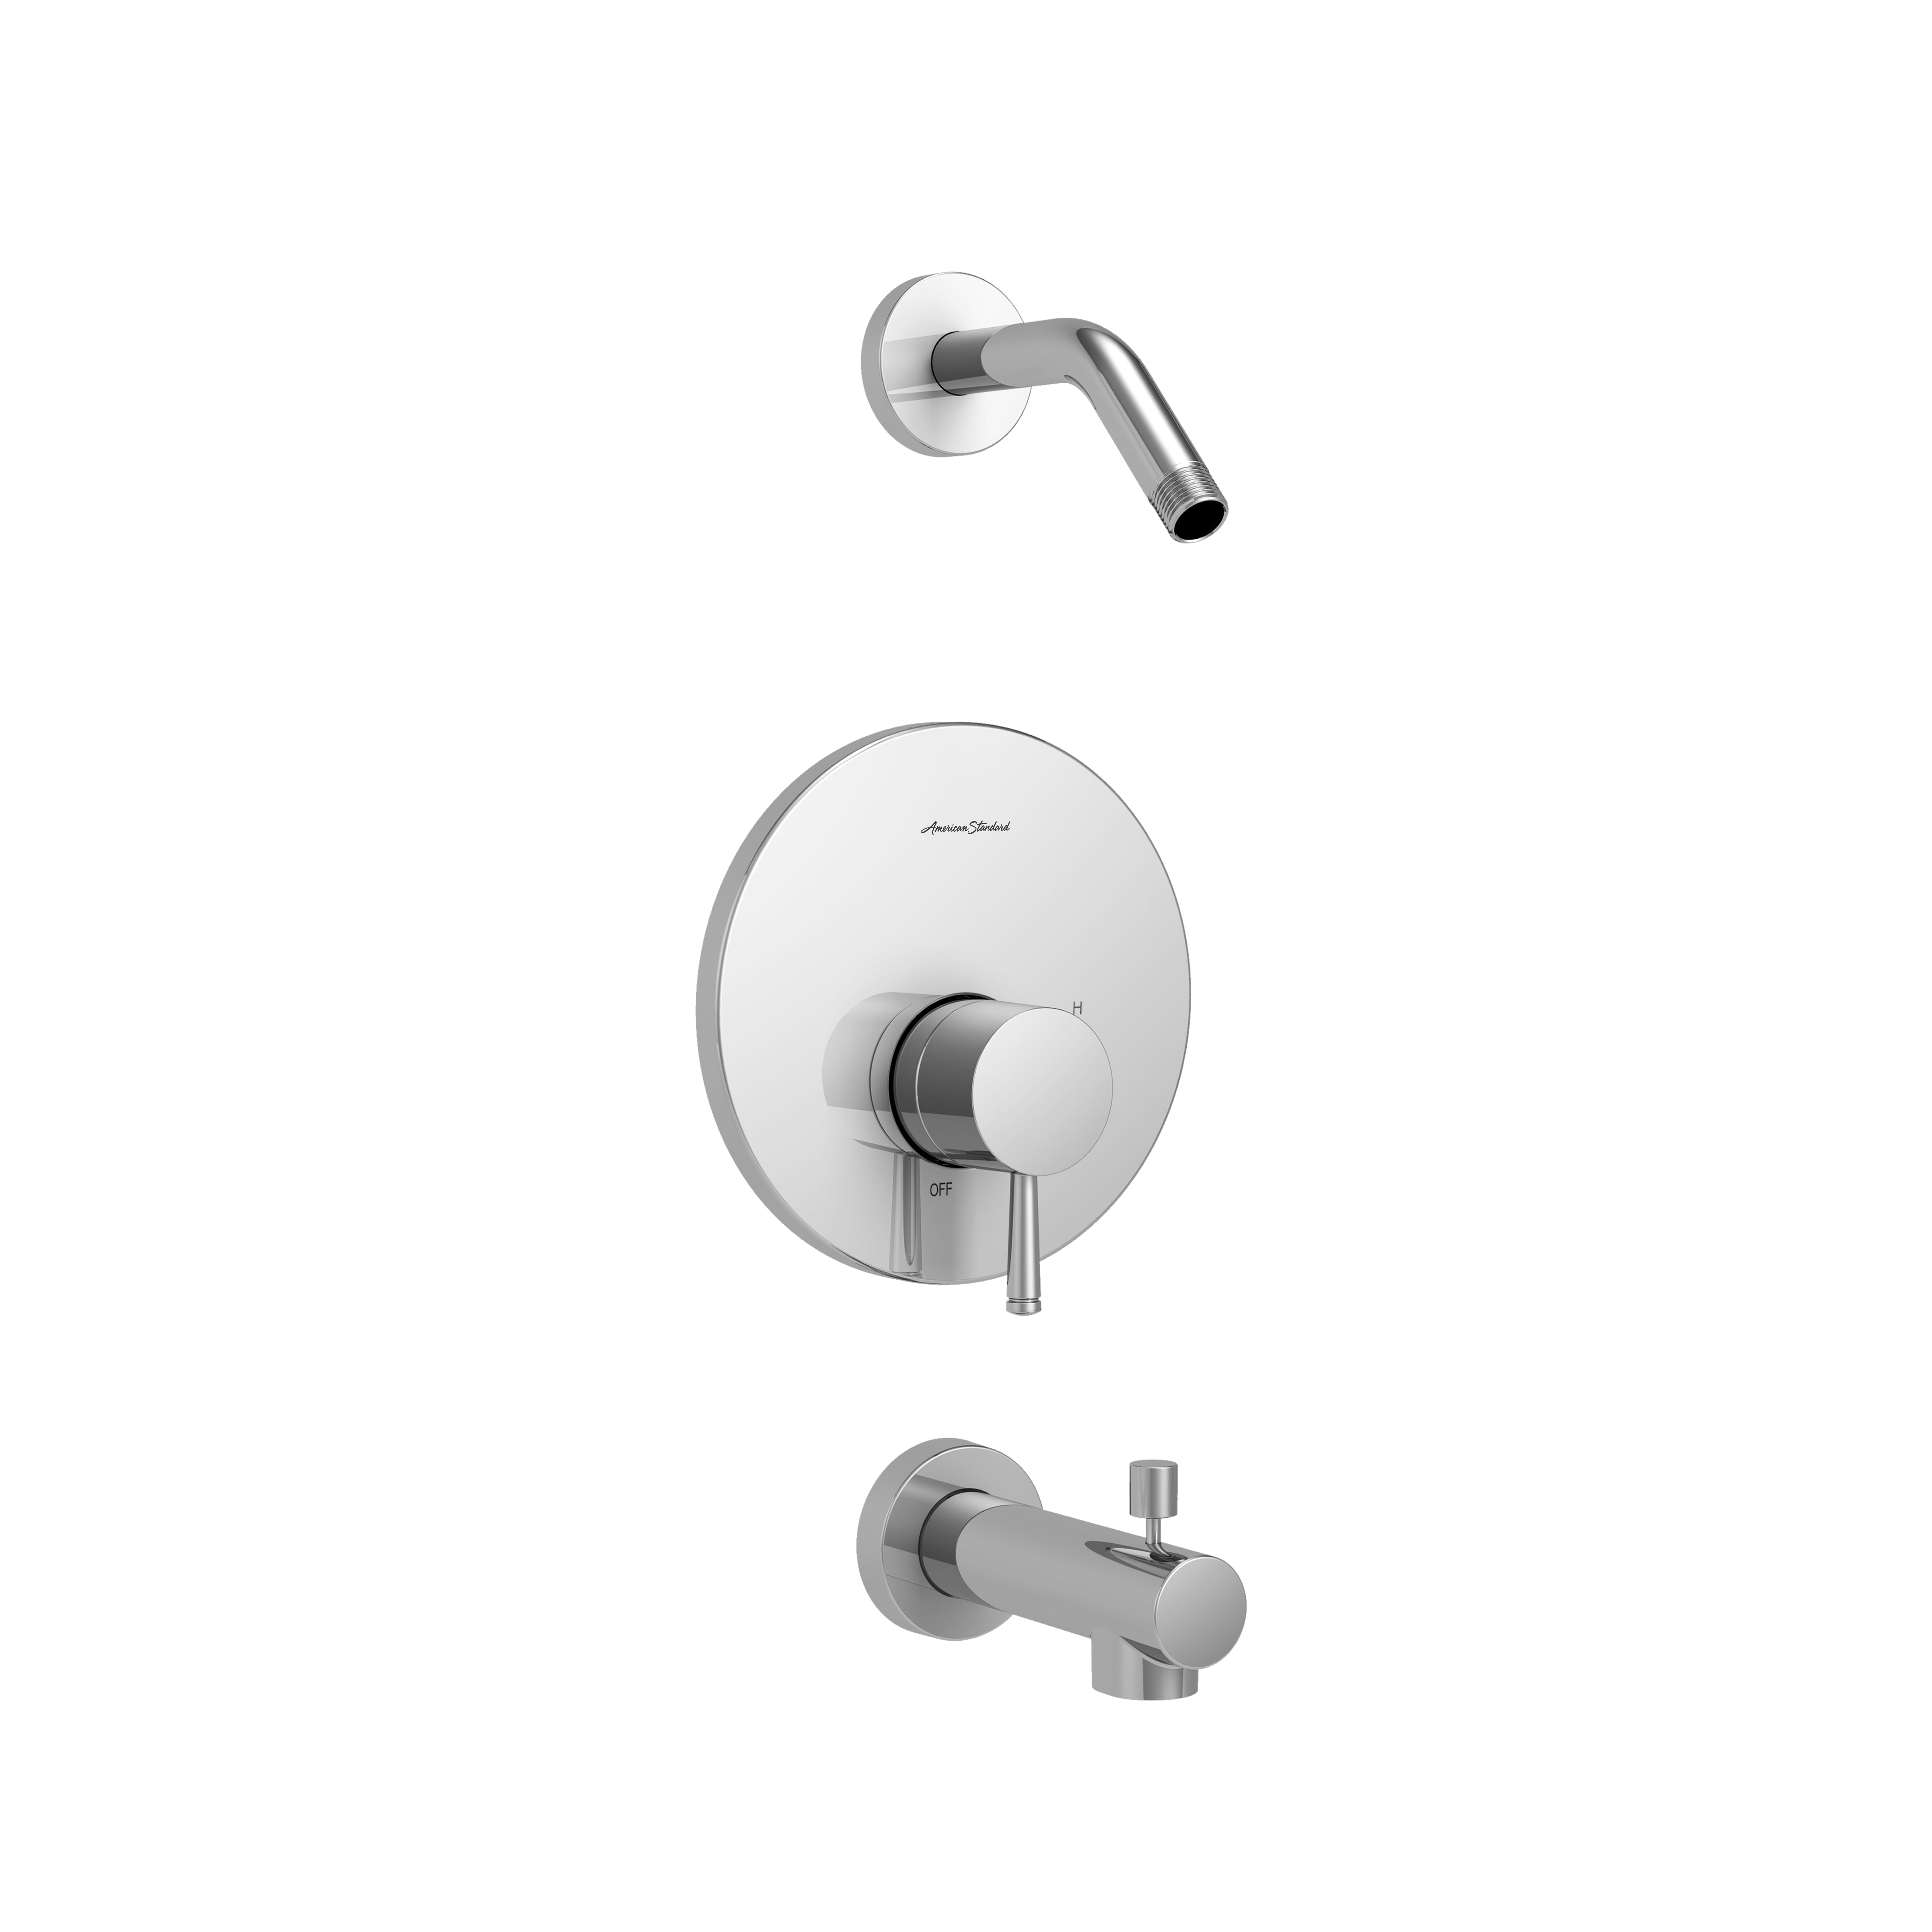 Serin® Tub and Shower Trim Kit, Double Ceramic Pressure Balance Cartridge With Lever Handle